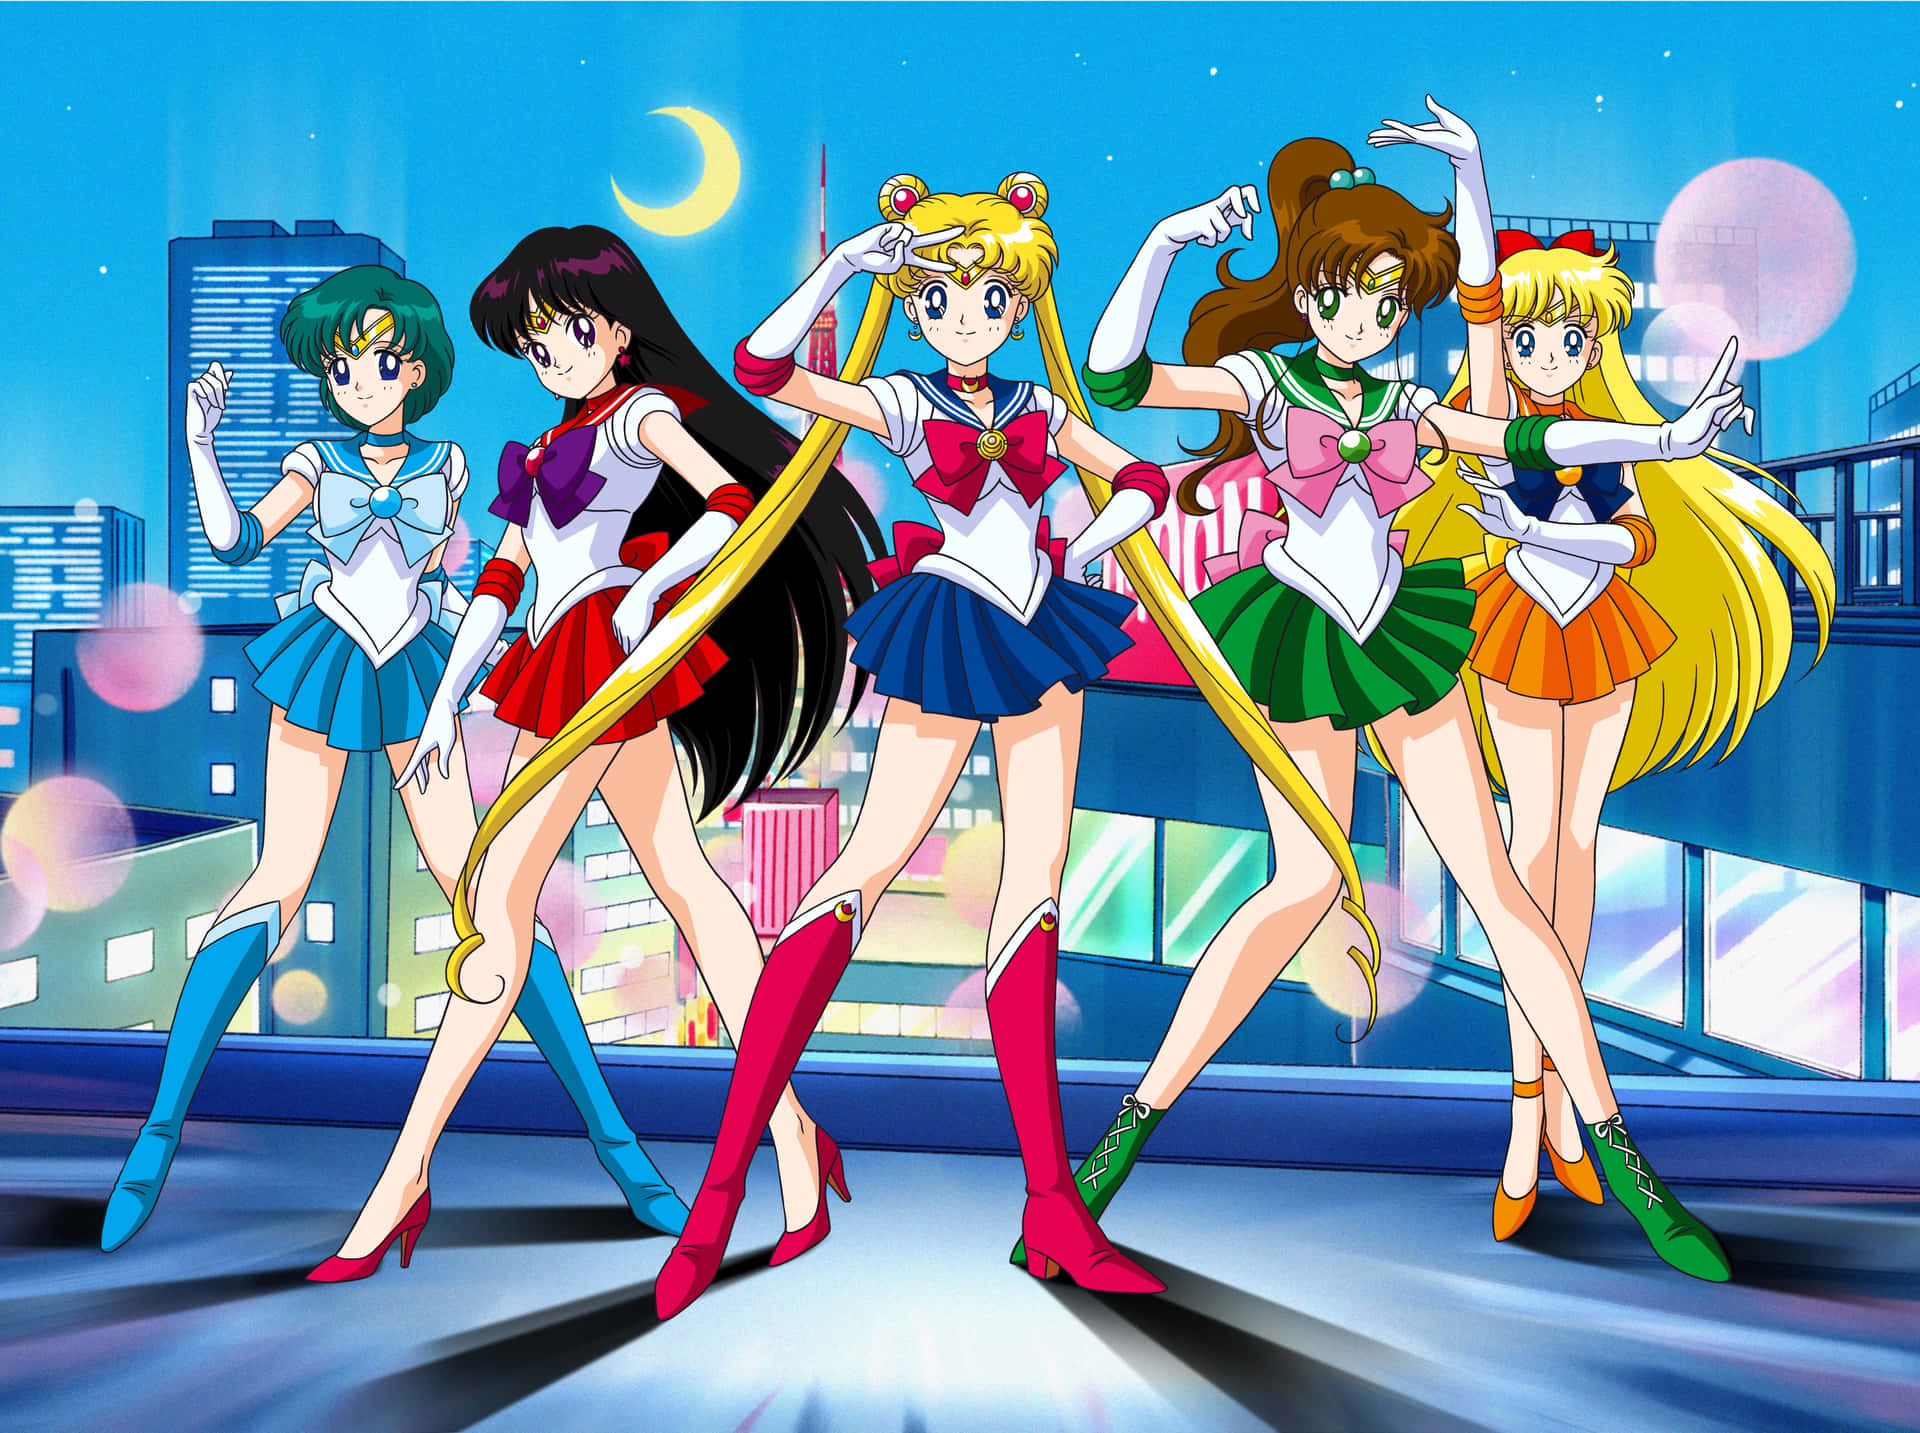 Free 90s Anime Wallpaper Downloads, [100+] 90s Anime Wallpapers for FREE |  